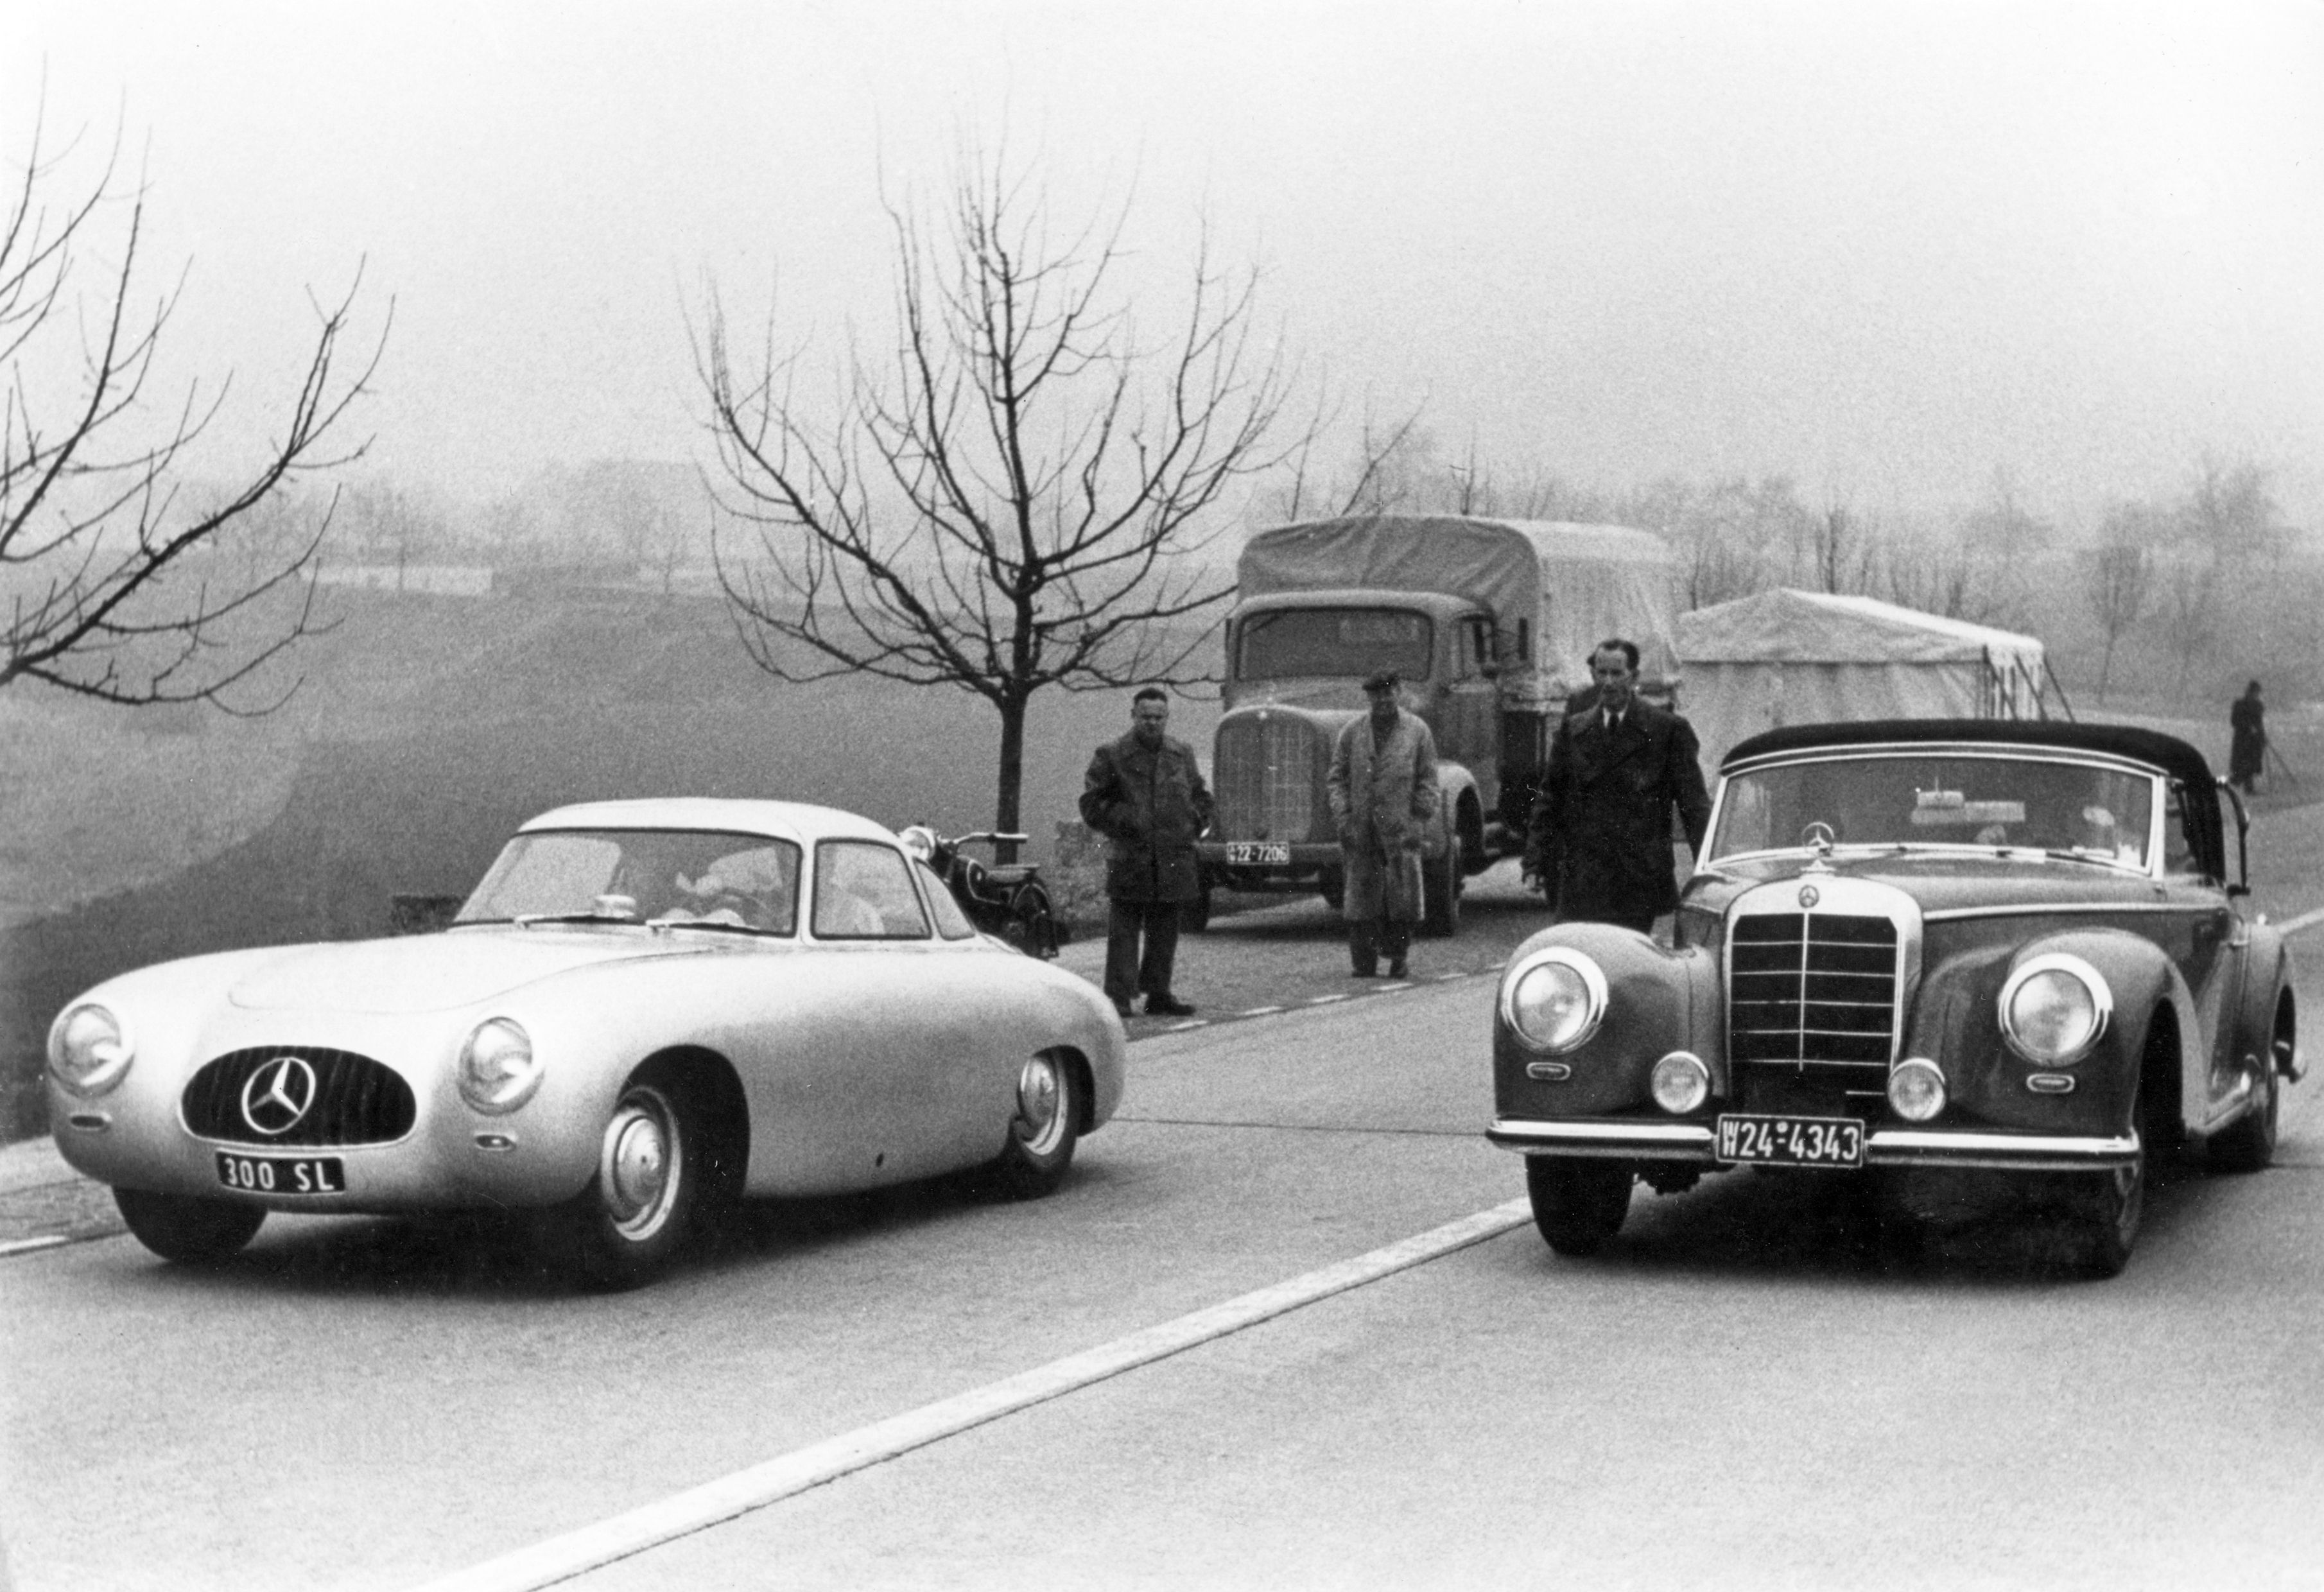 Mercedes-Benz 300 SL racing sports car (W 194) from the year 1952.